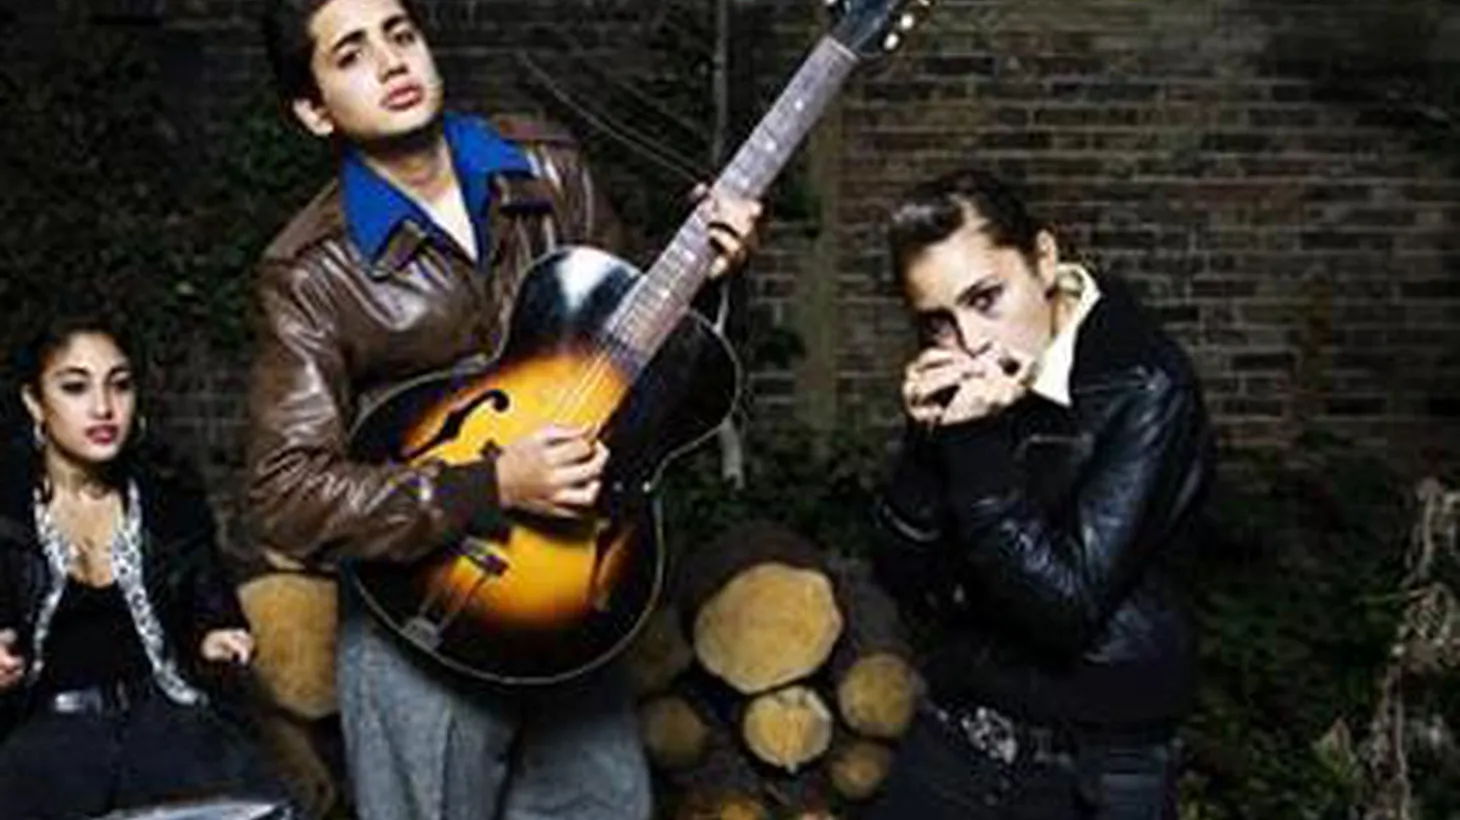 Reared in a music-loving household in North London, sibling trio Kitty Daisy & Lewis create original rockabilly, R&B and vintage country songs which they’ll share with Morning Becomes Eclectic listeners at 11:15am.